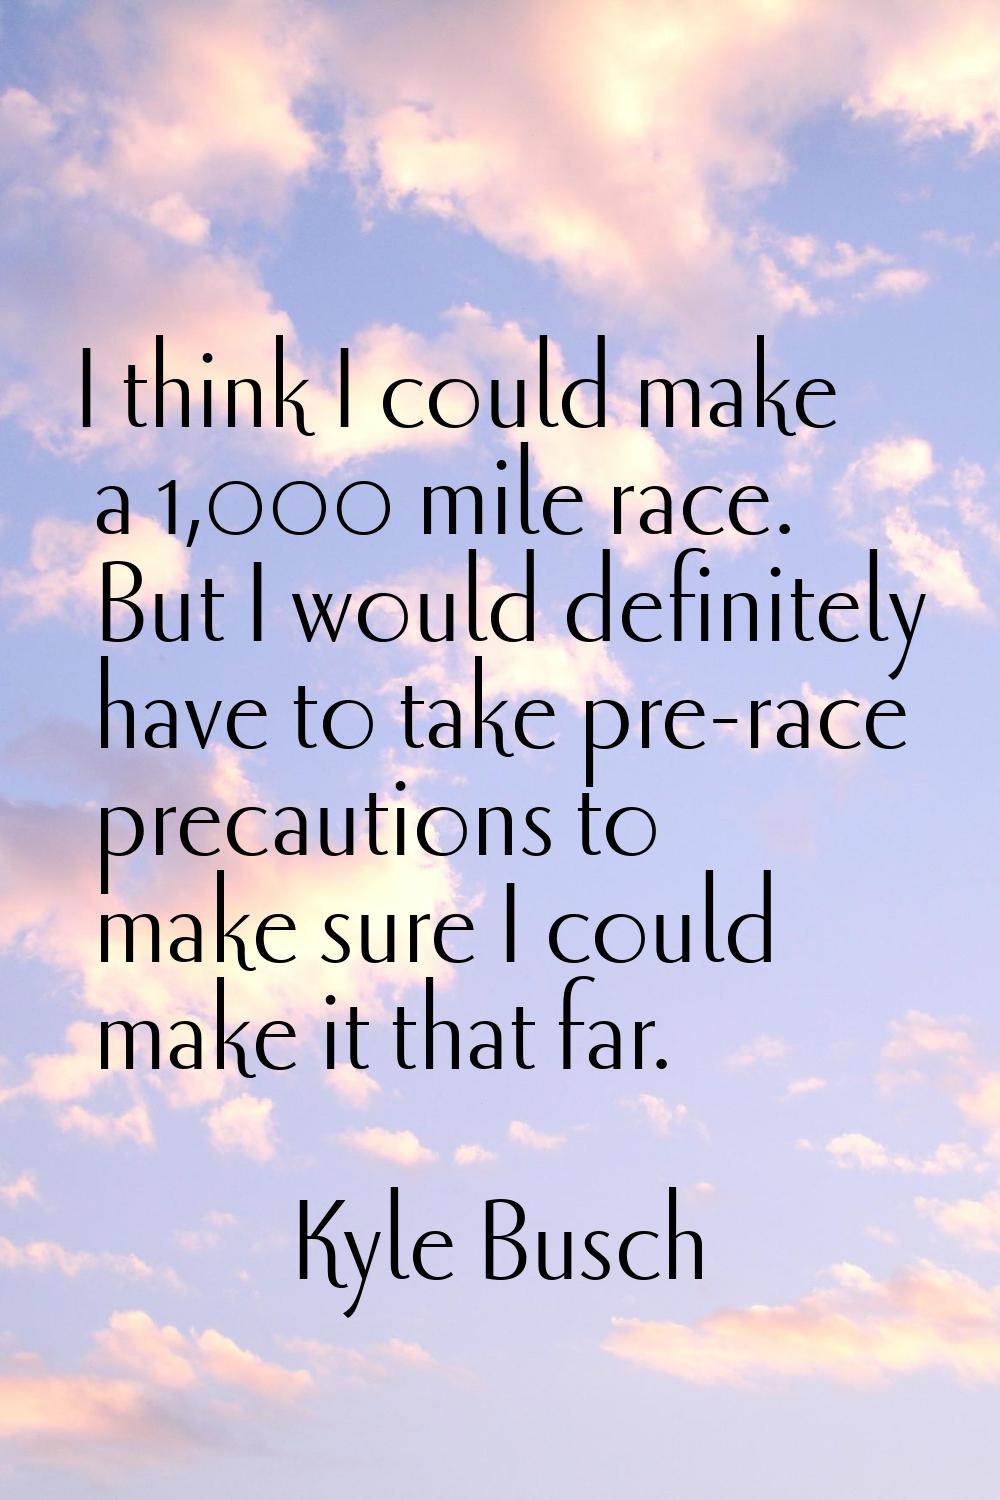 I think I could make a 1,000 mile race. But I would definitely have to take pre-race precautions to